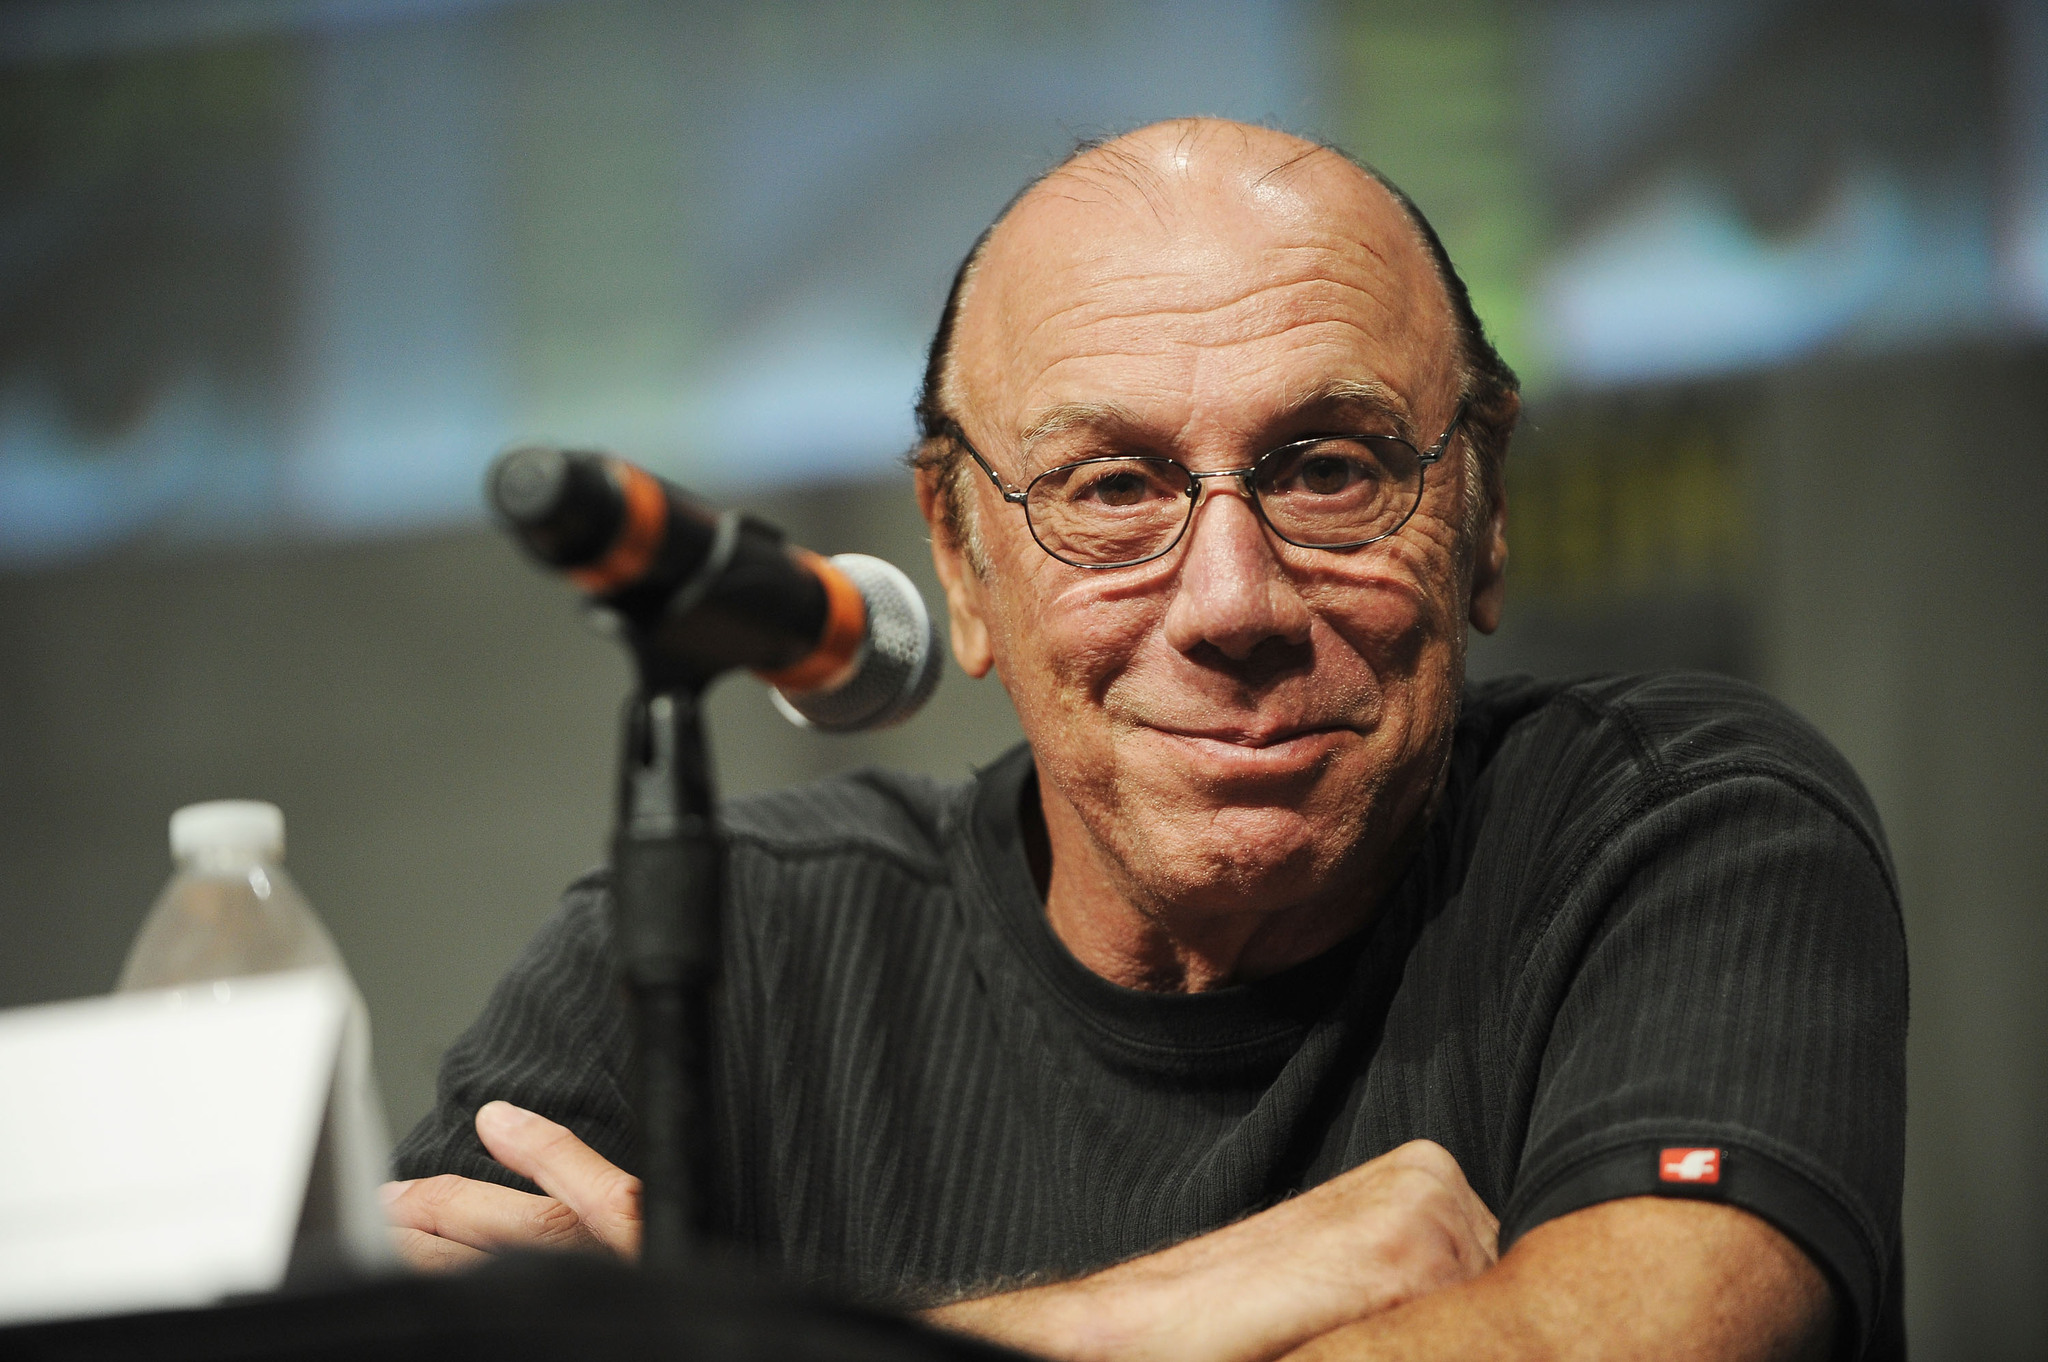 Dayton Callie at event of Sons of Anarchy (2008)